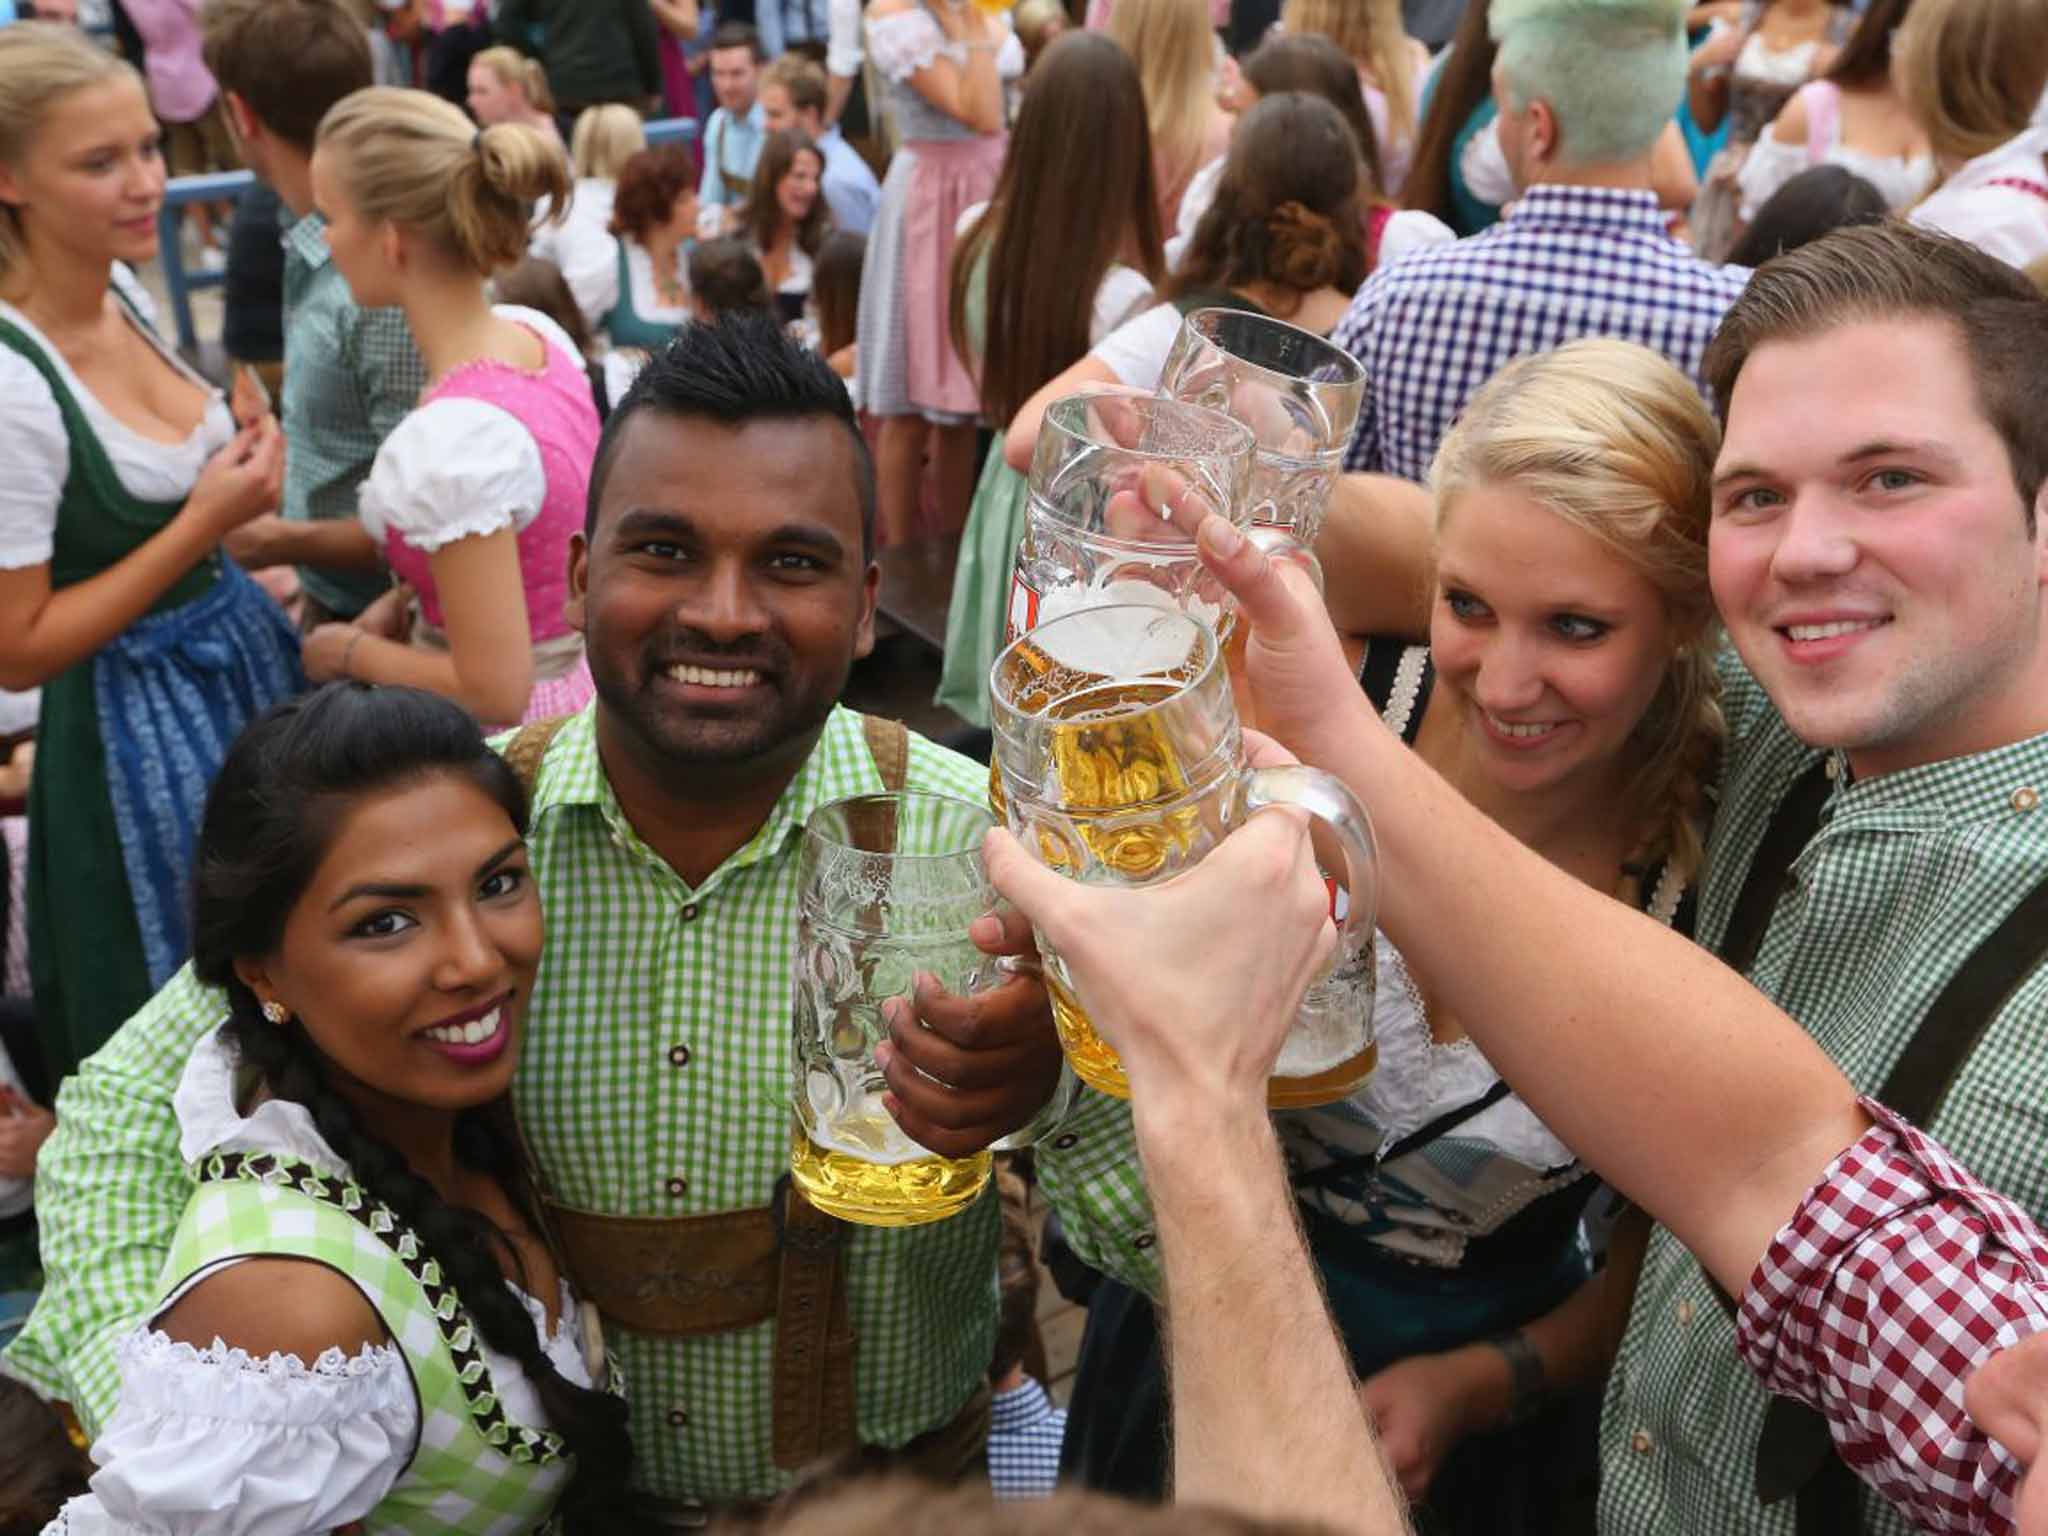 Fest foot forward: the dedication of Bavarians to their beer extends all the way to Munich airport